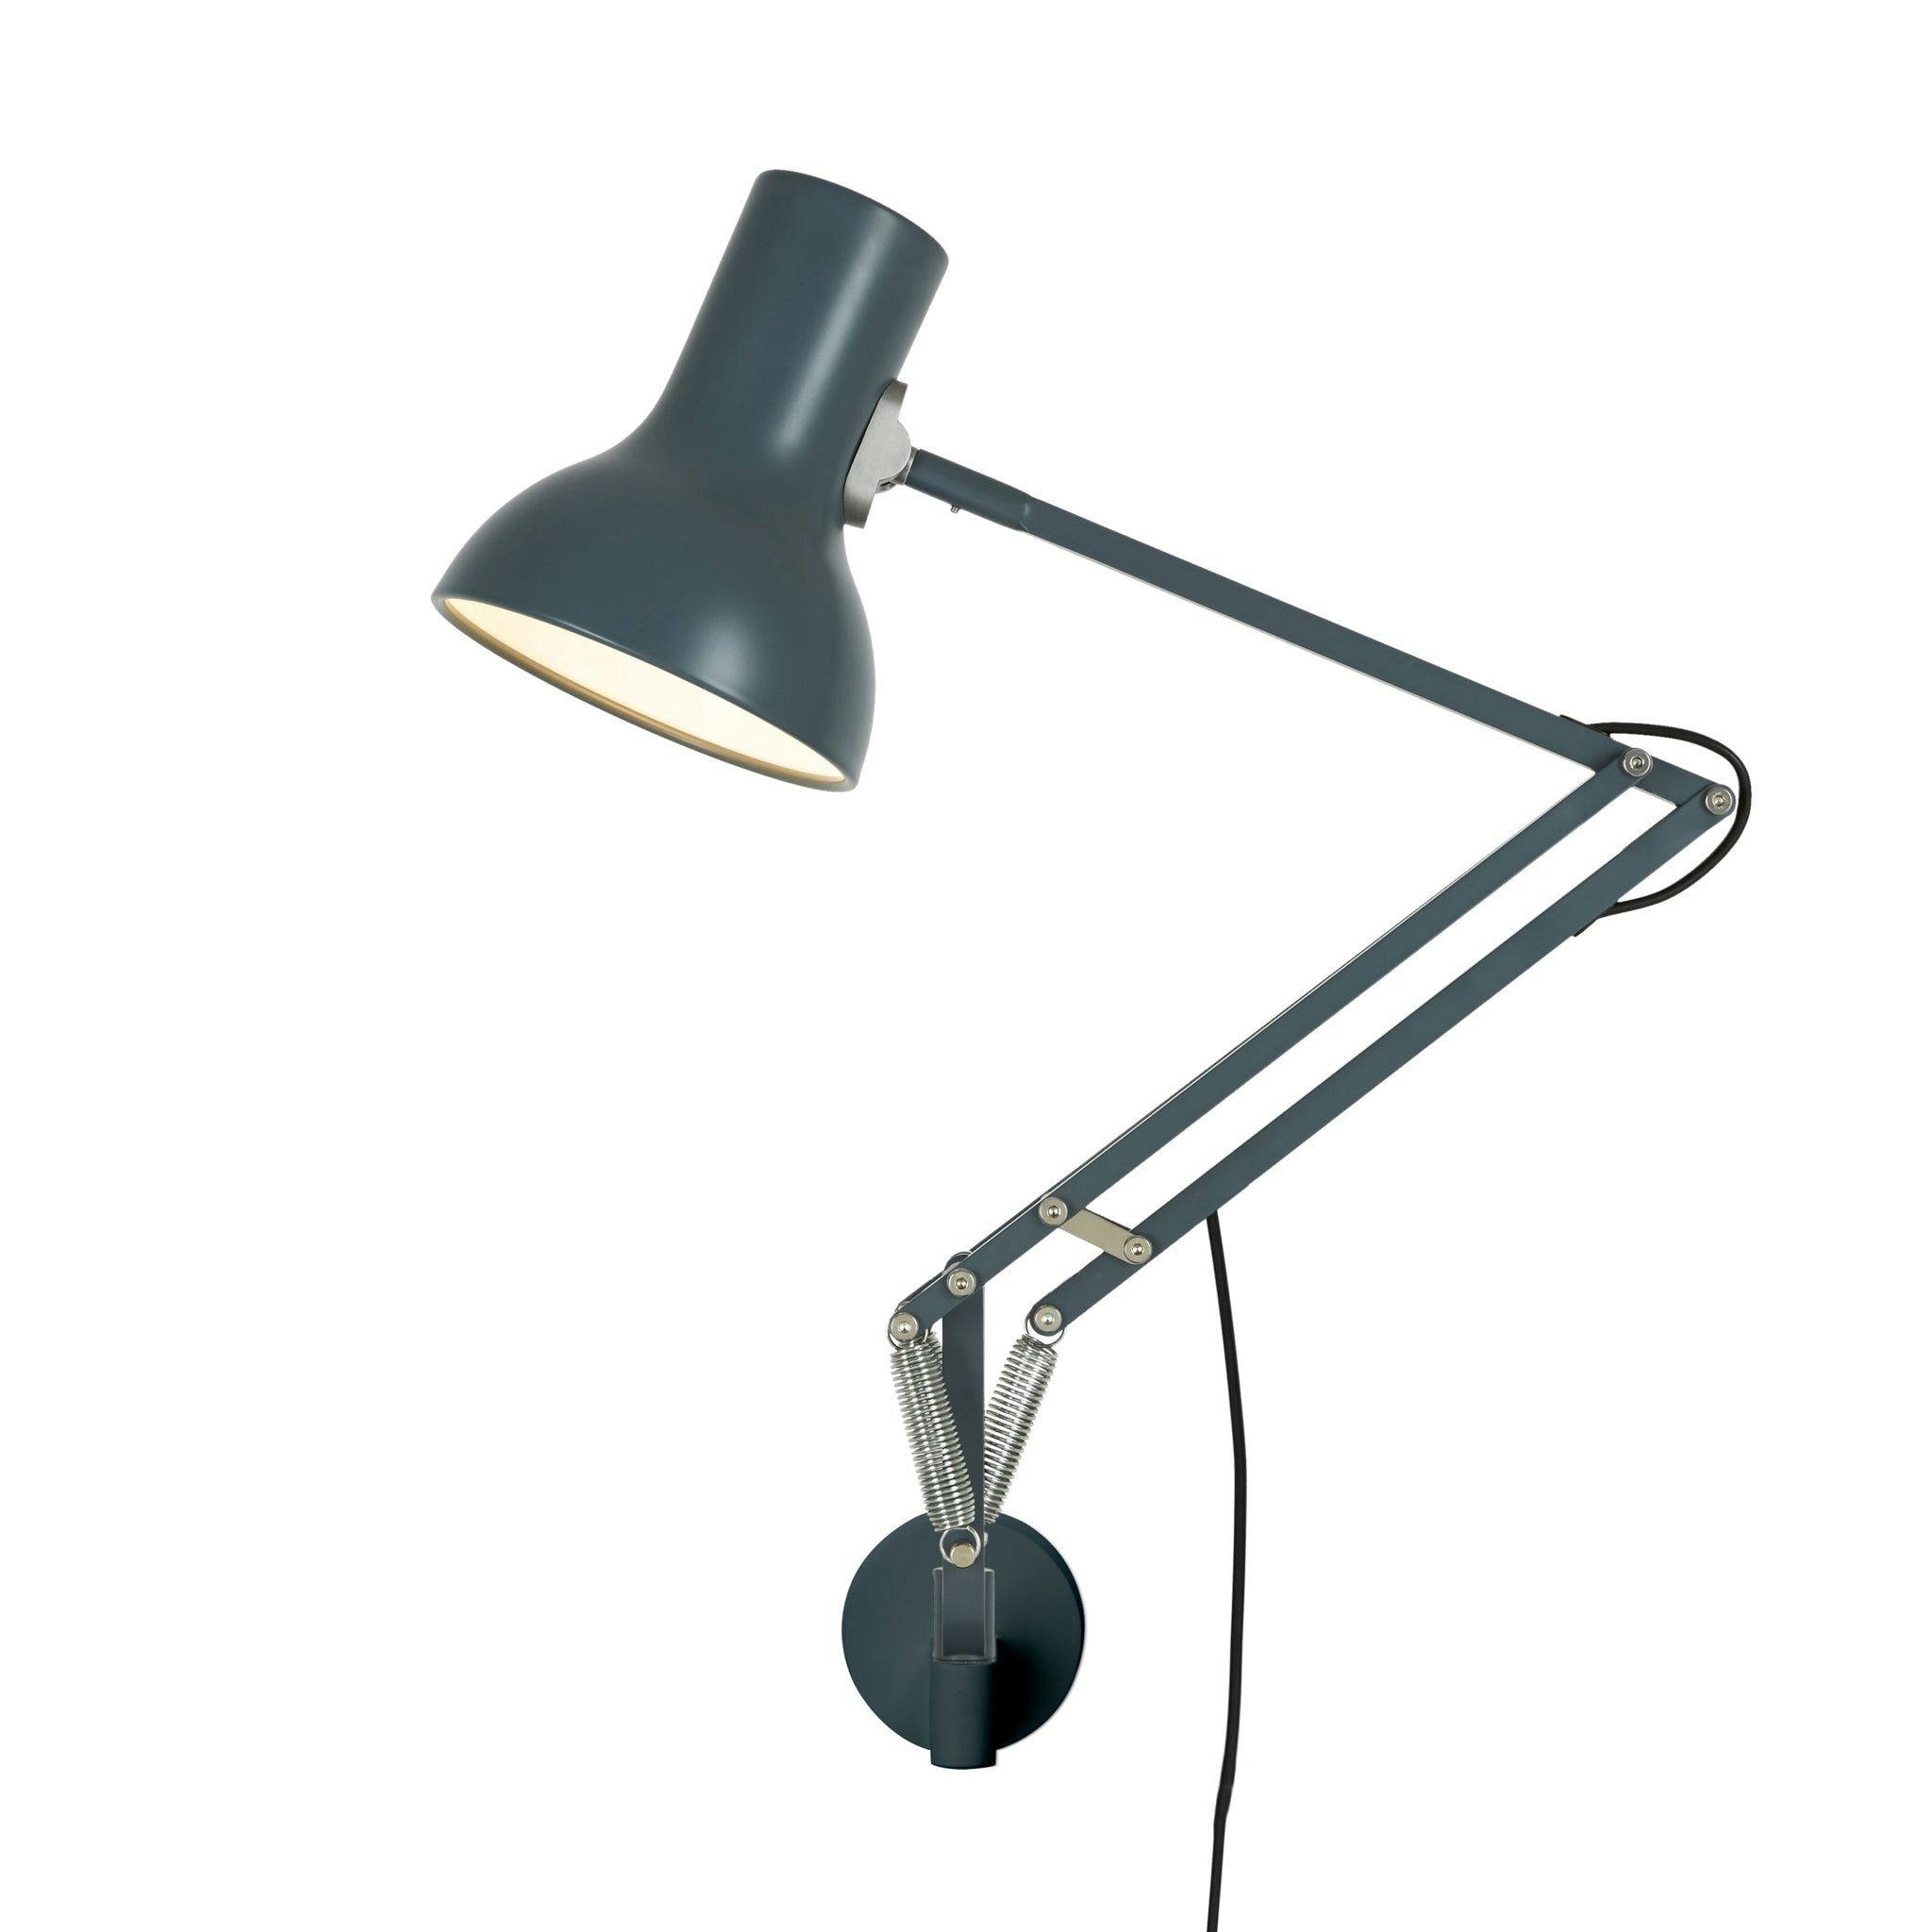 Type 75 Mini Wall Mounted Lamp by Anglepoise